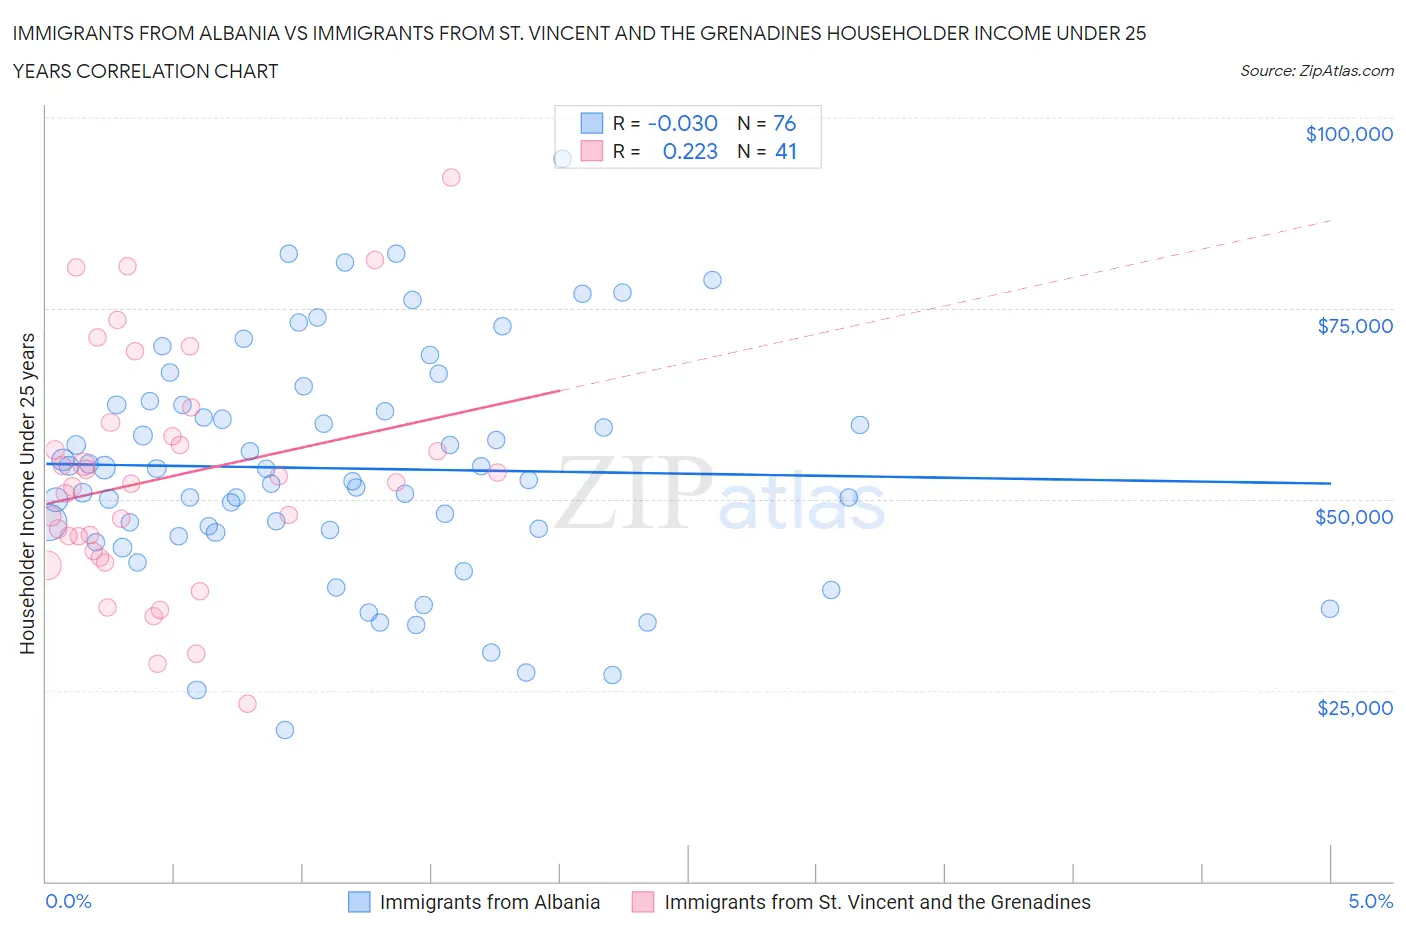 Immigrants from Albania vs Immigrants from St. Vincent and the Grenadines Householder Income Under 25 years